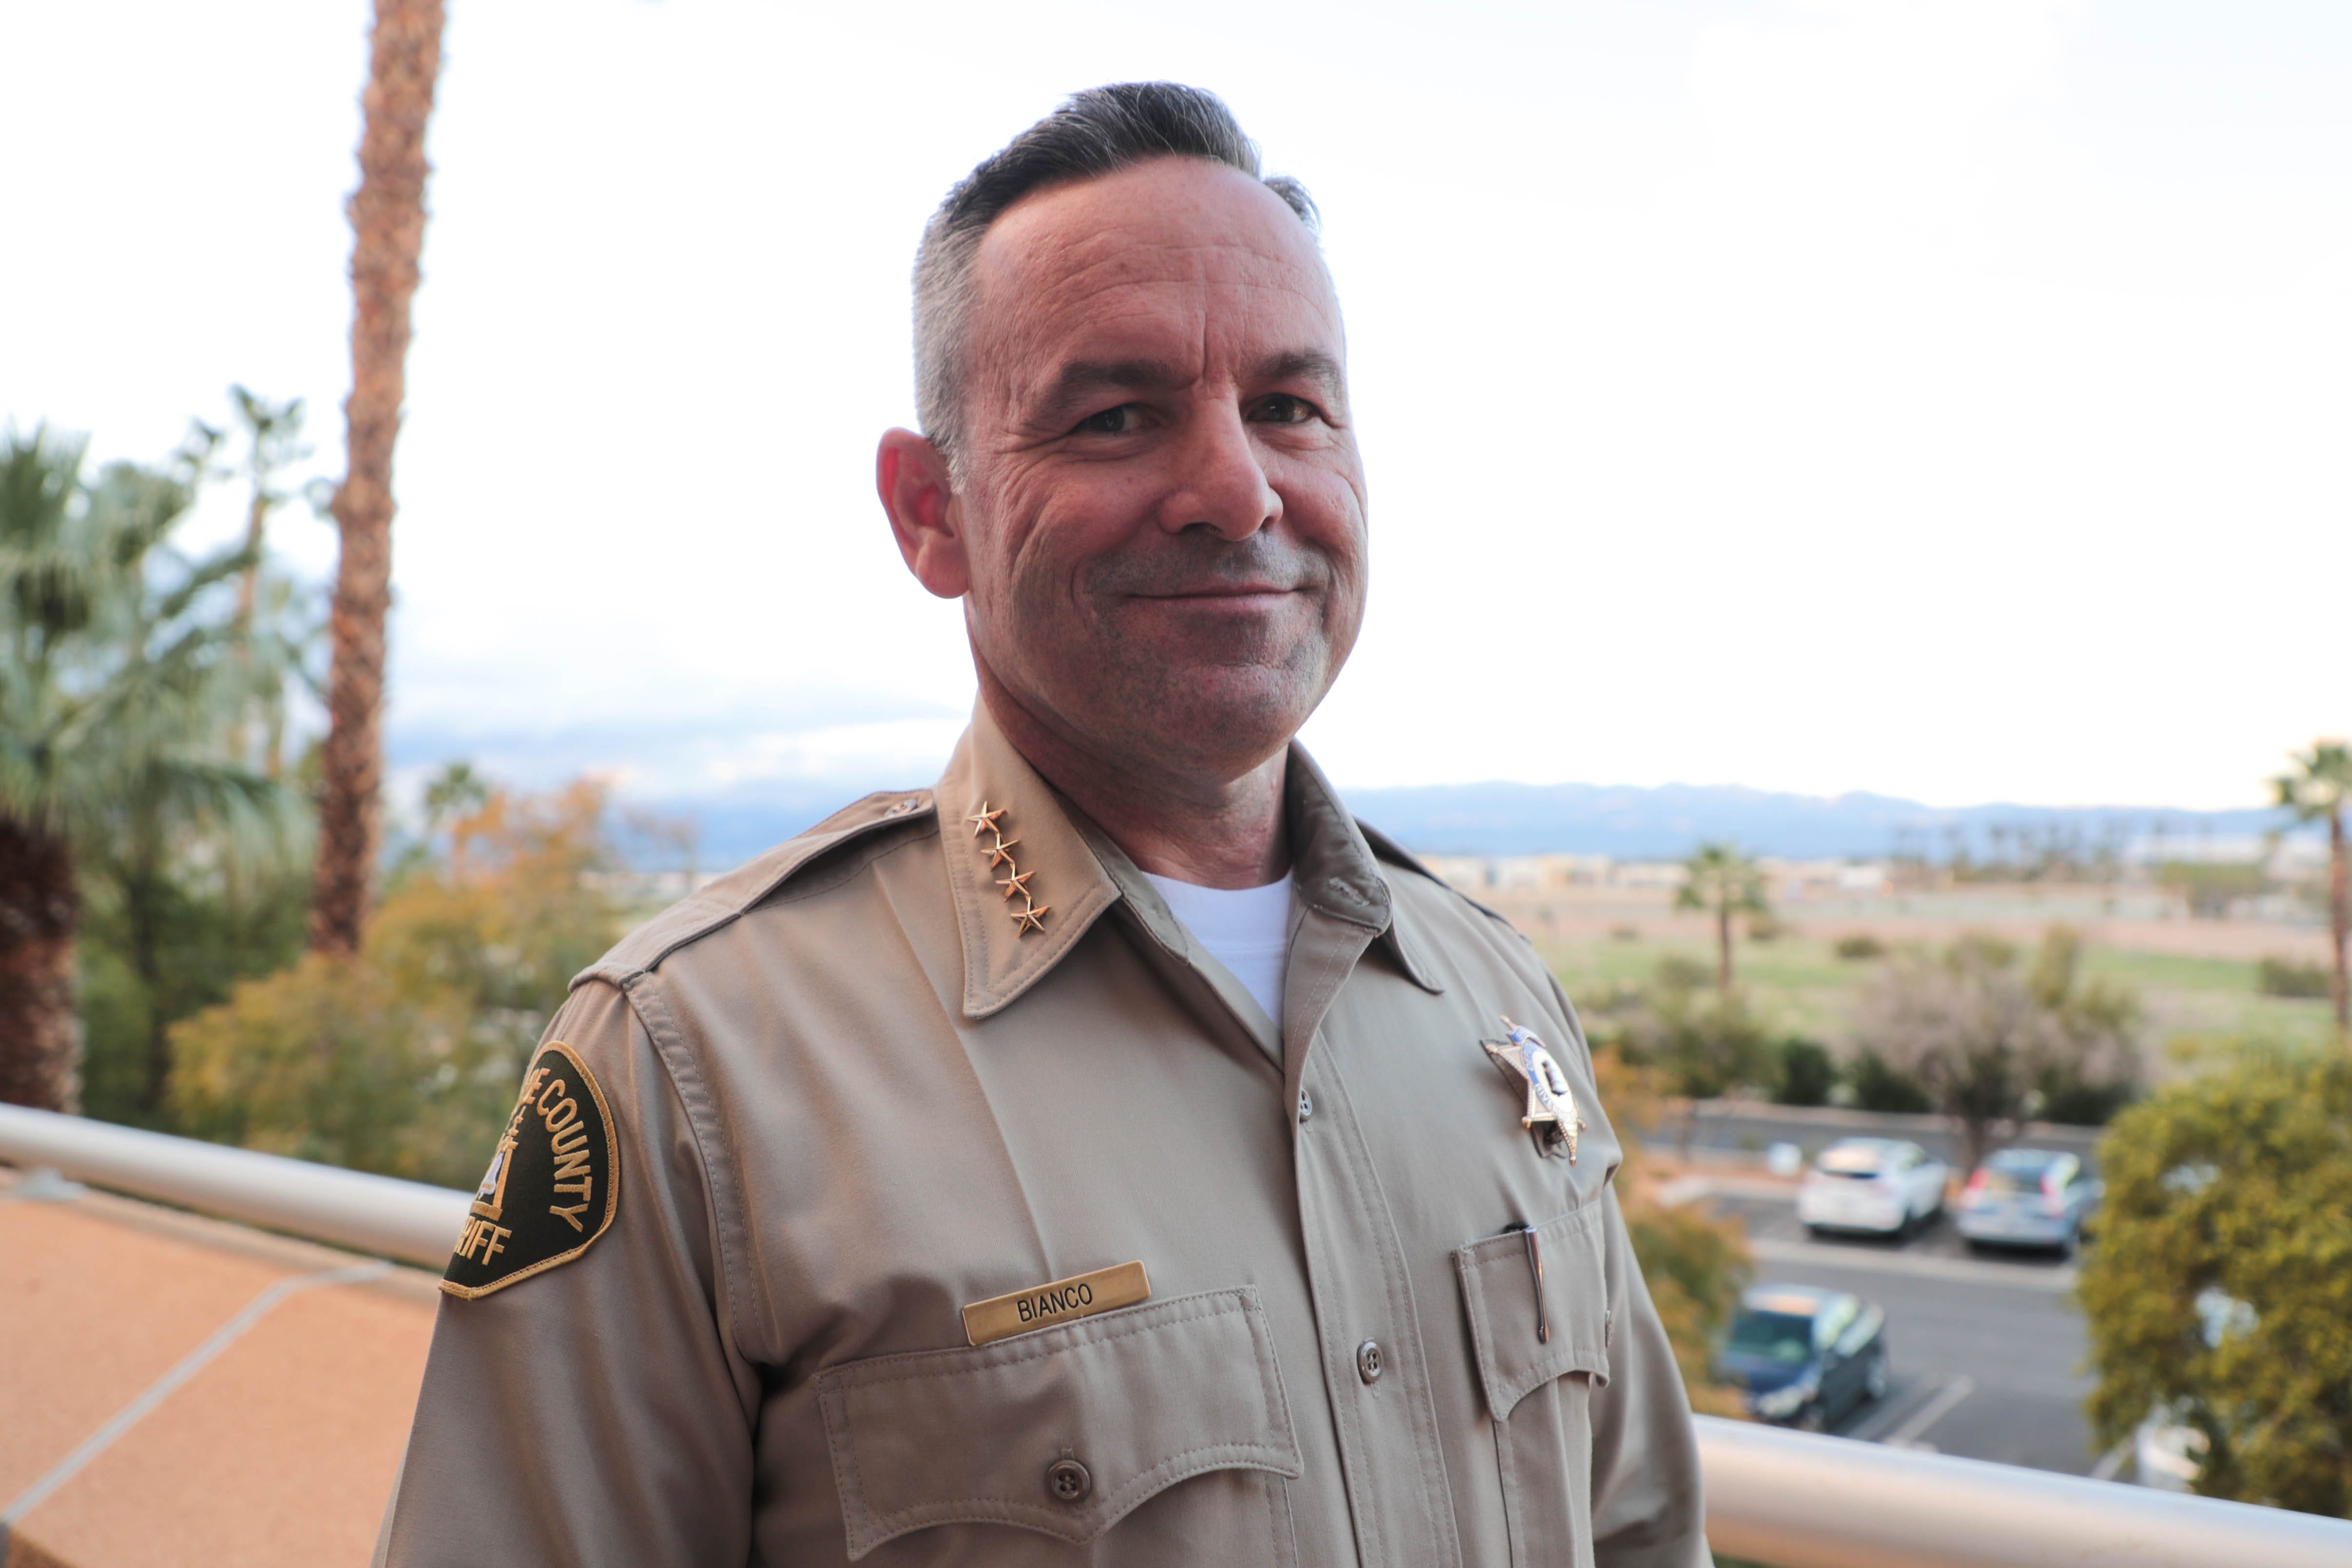 Riverside Sheriff Chad Bianco defends past Oath membership as some call for his resignation